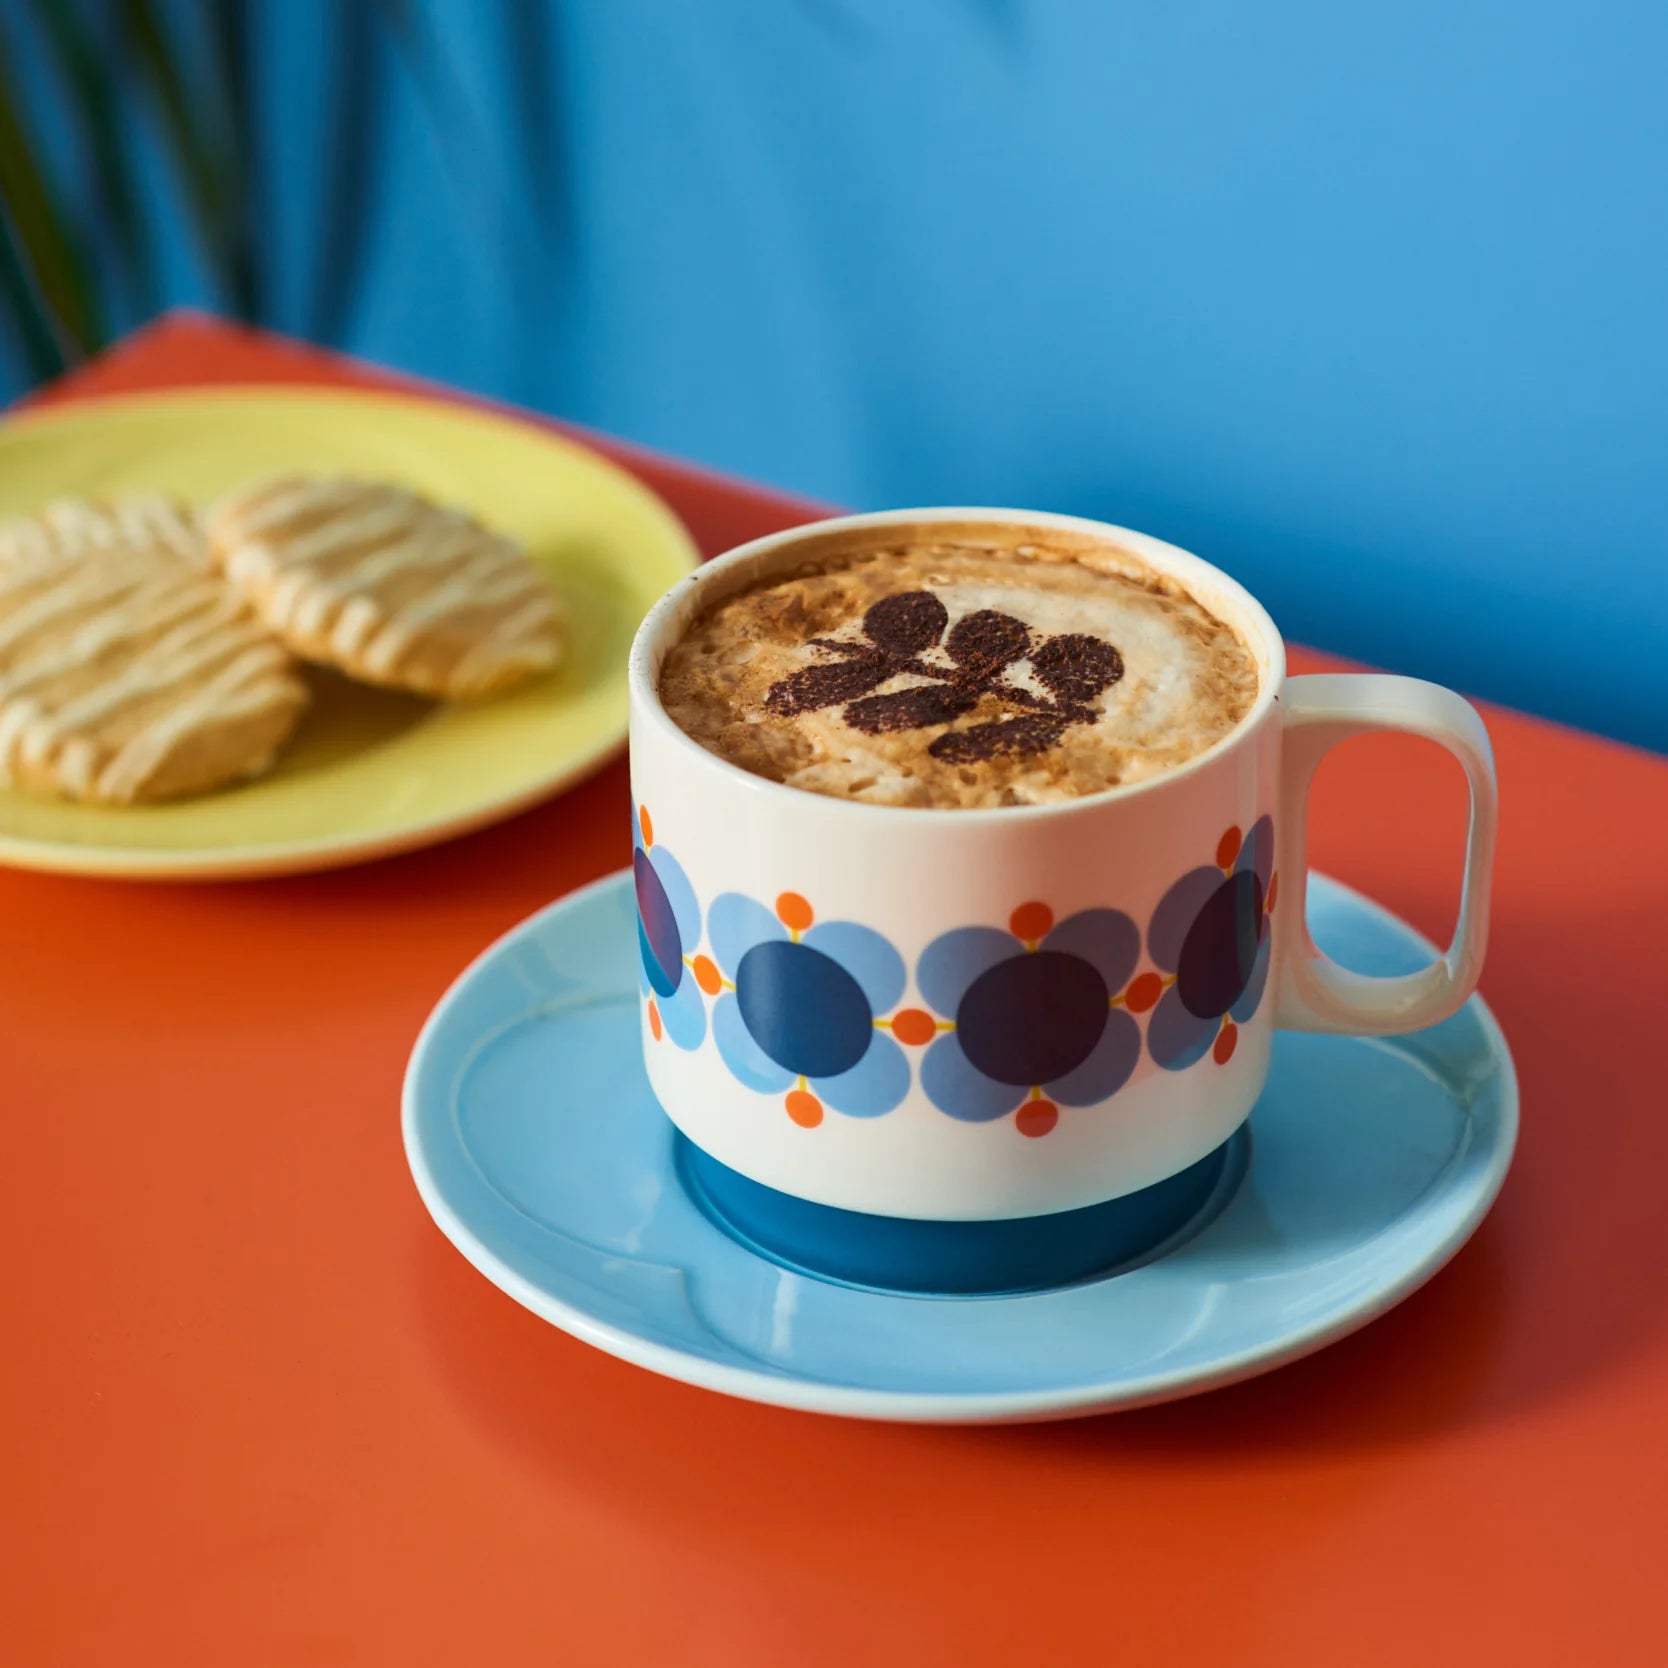 Fab Gifts | Orla Kiely Atomic Flower Tea Cup & Saucer Set of 2 by Weirs of Baggot Street